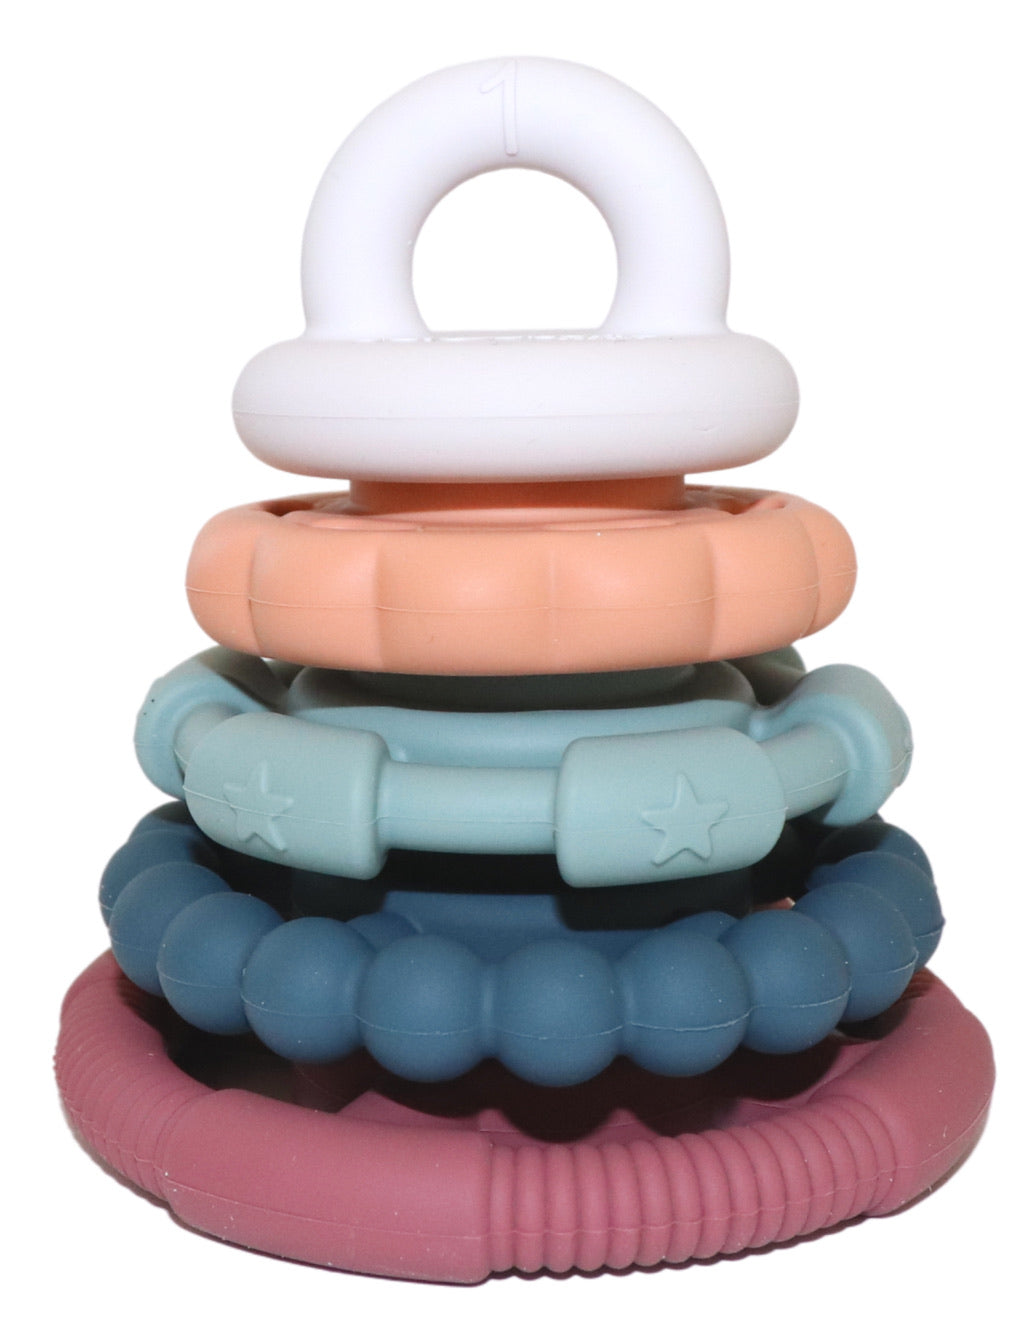 Jellystone Designs Rainbow Stacker and Teething Toy Earth